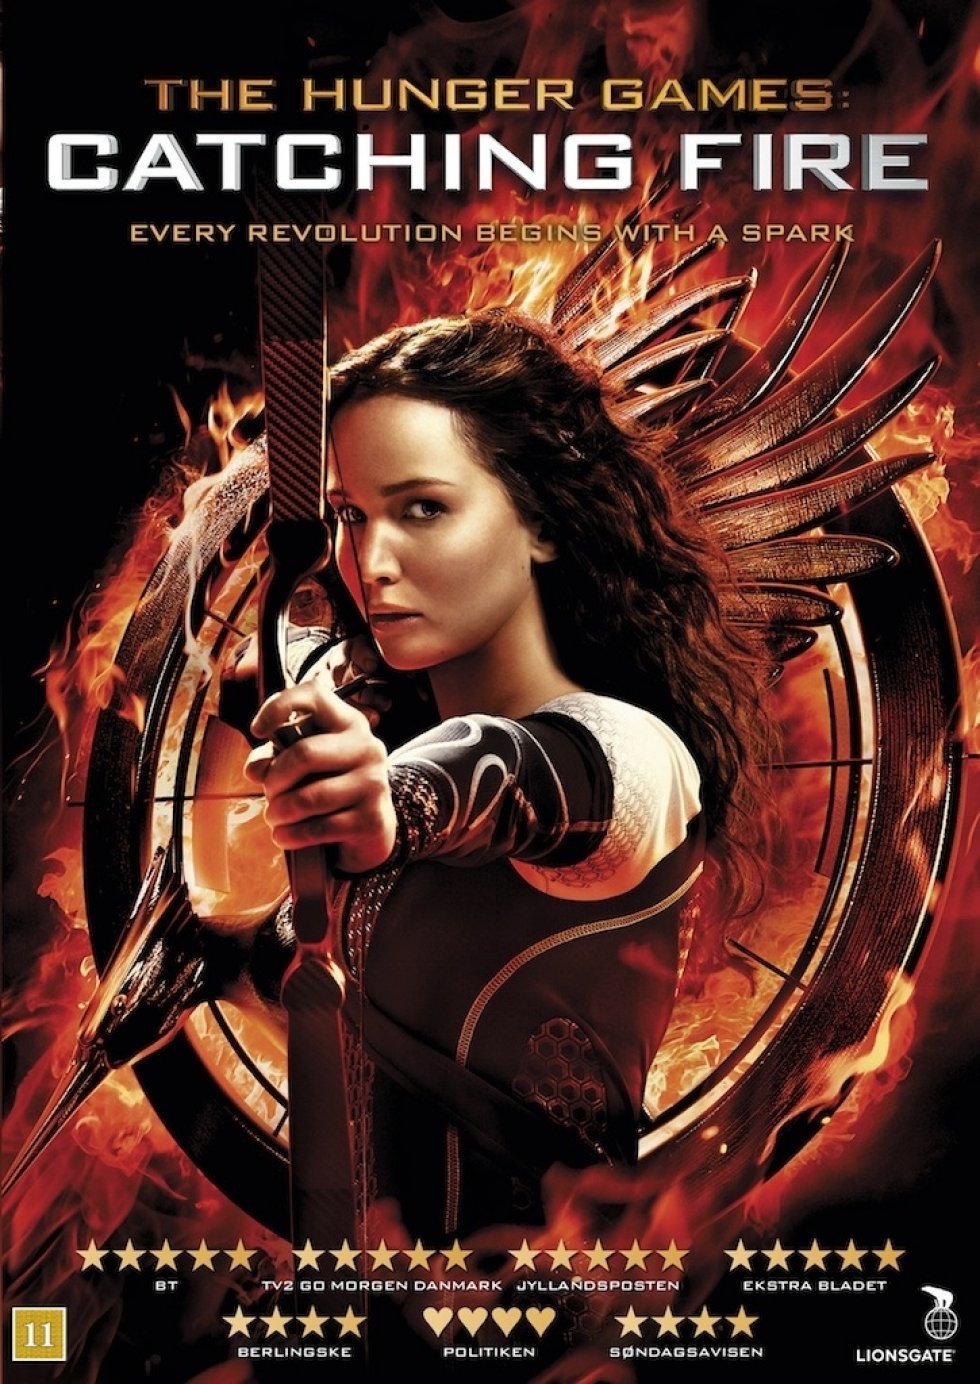 Foto: Nordisk Film A/S - [Anmeldelse]: The Hunger Games Catching Fire